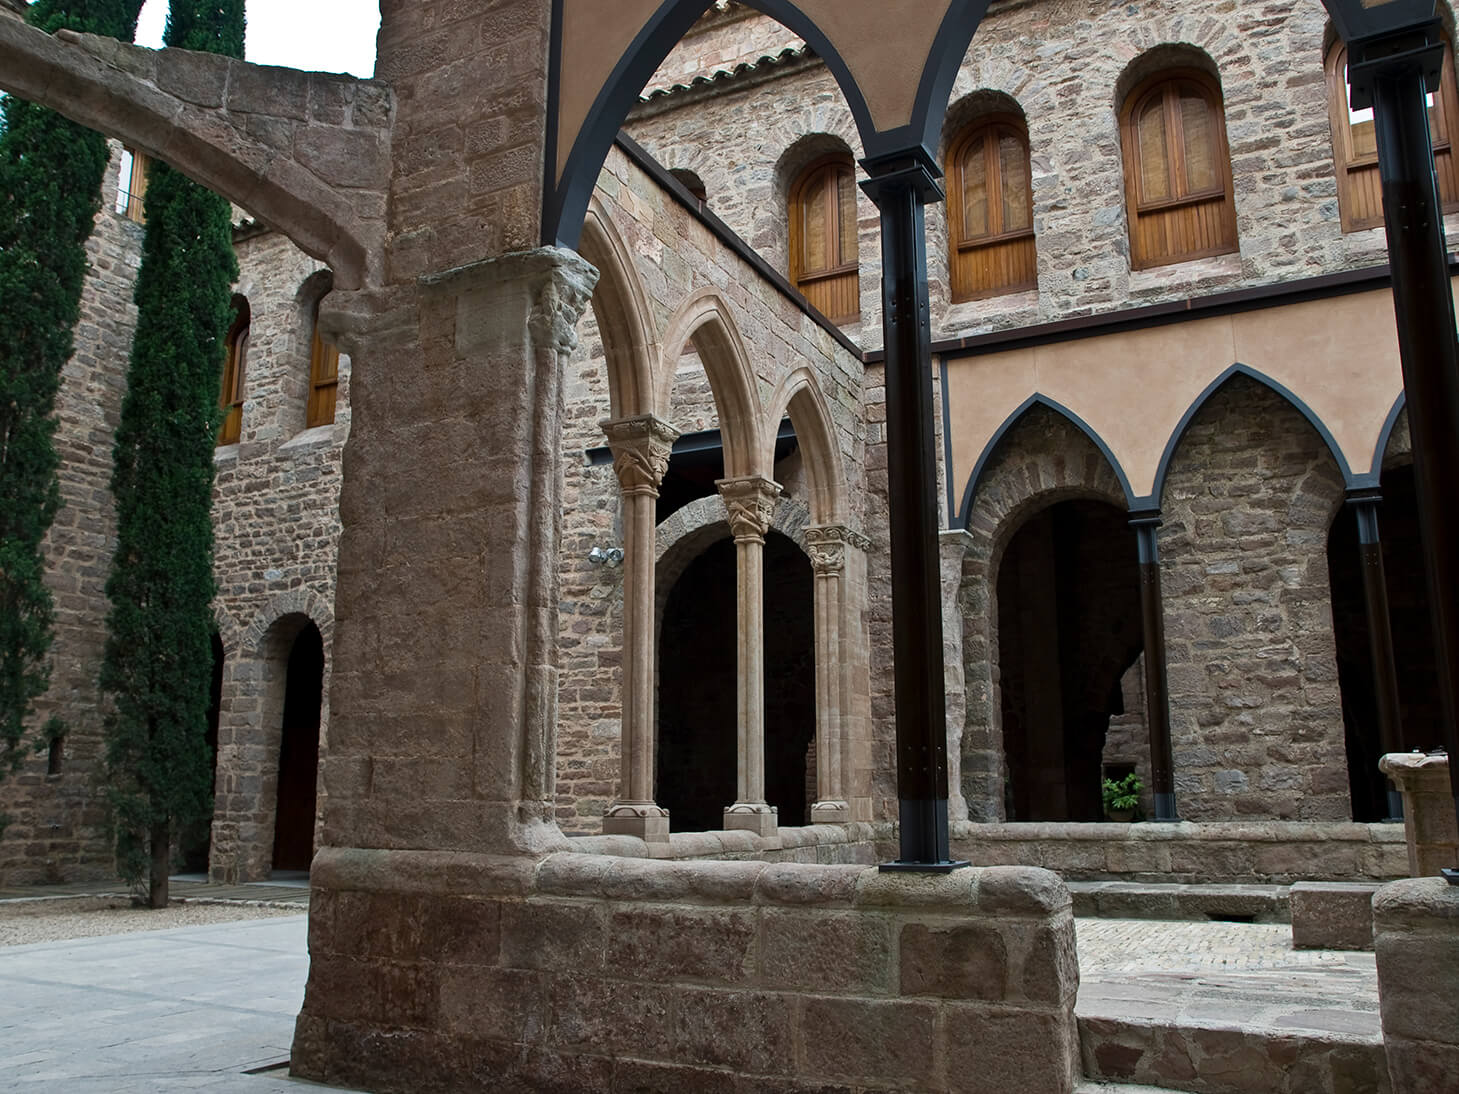 Detail of a courtyard at the Castle of Cardona